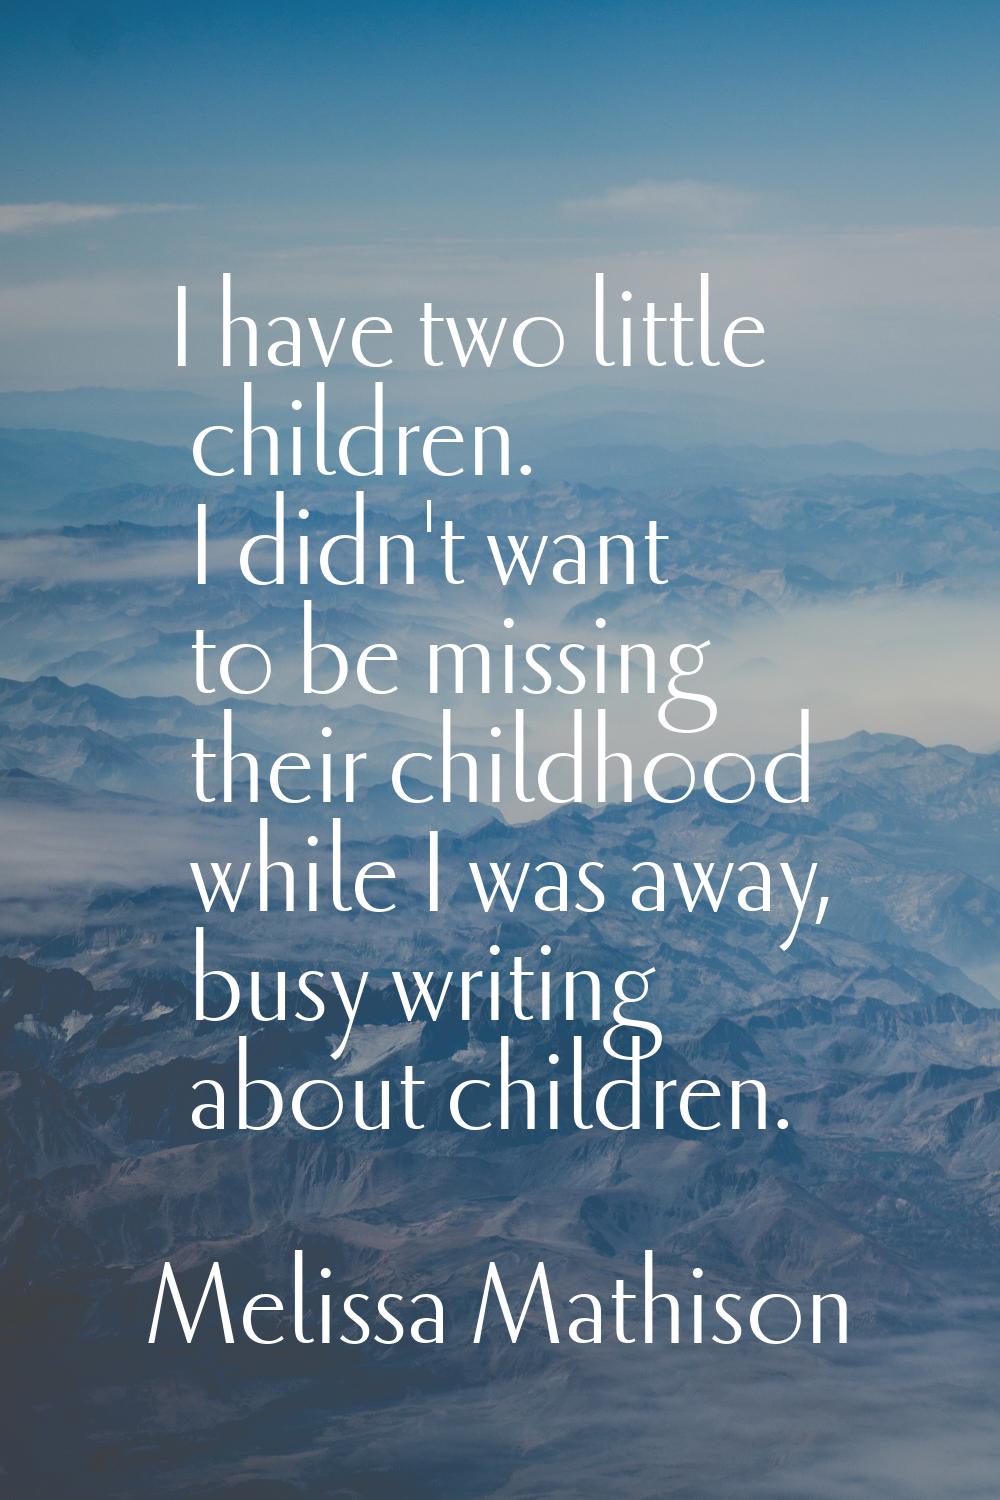 I have two little children. I didn't want to be missing their childhood while I was away, busy writ